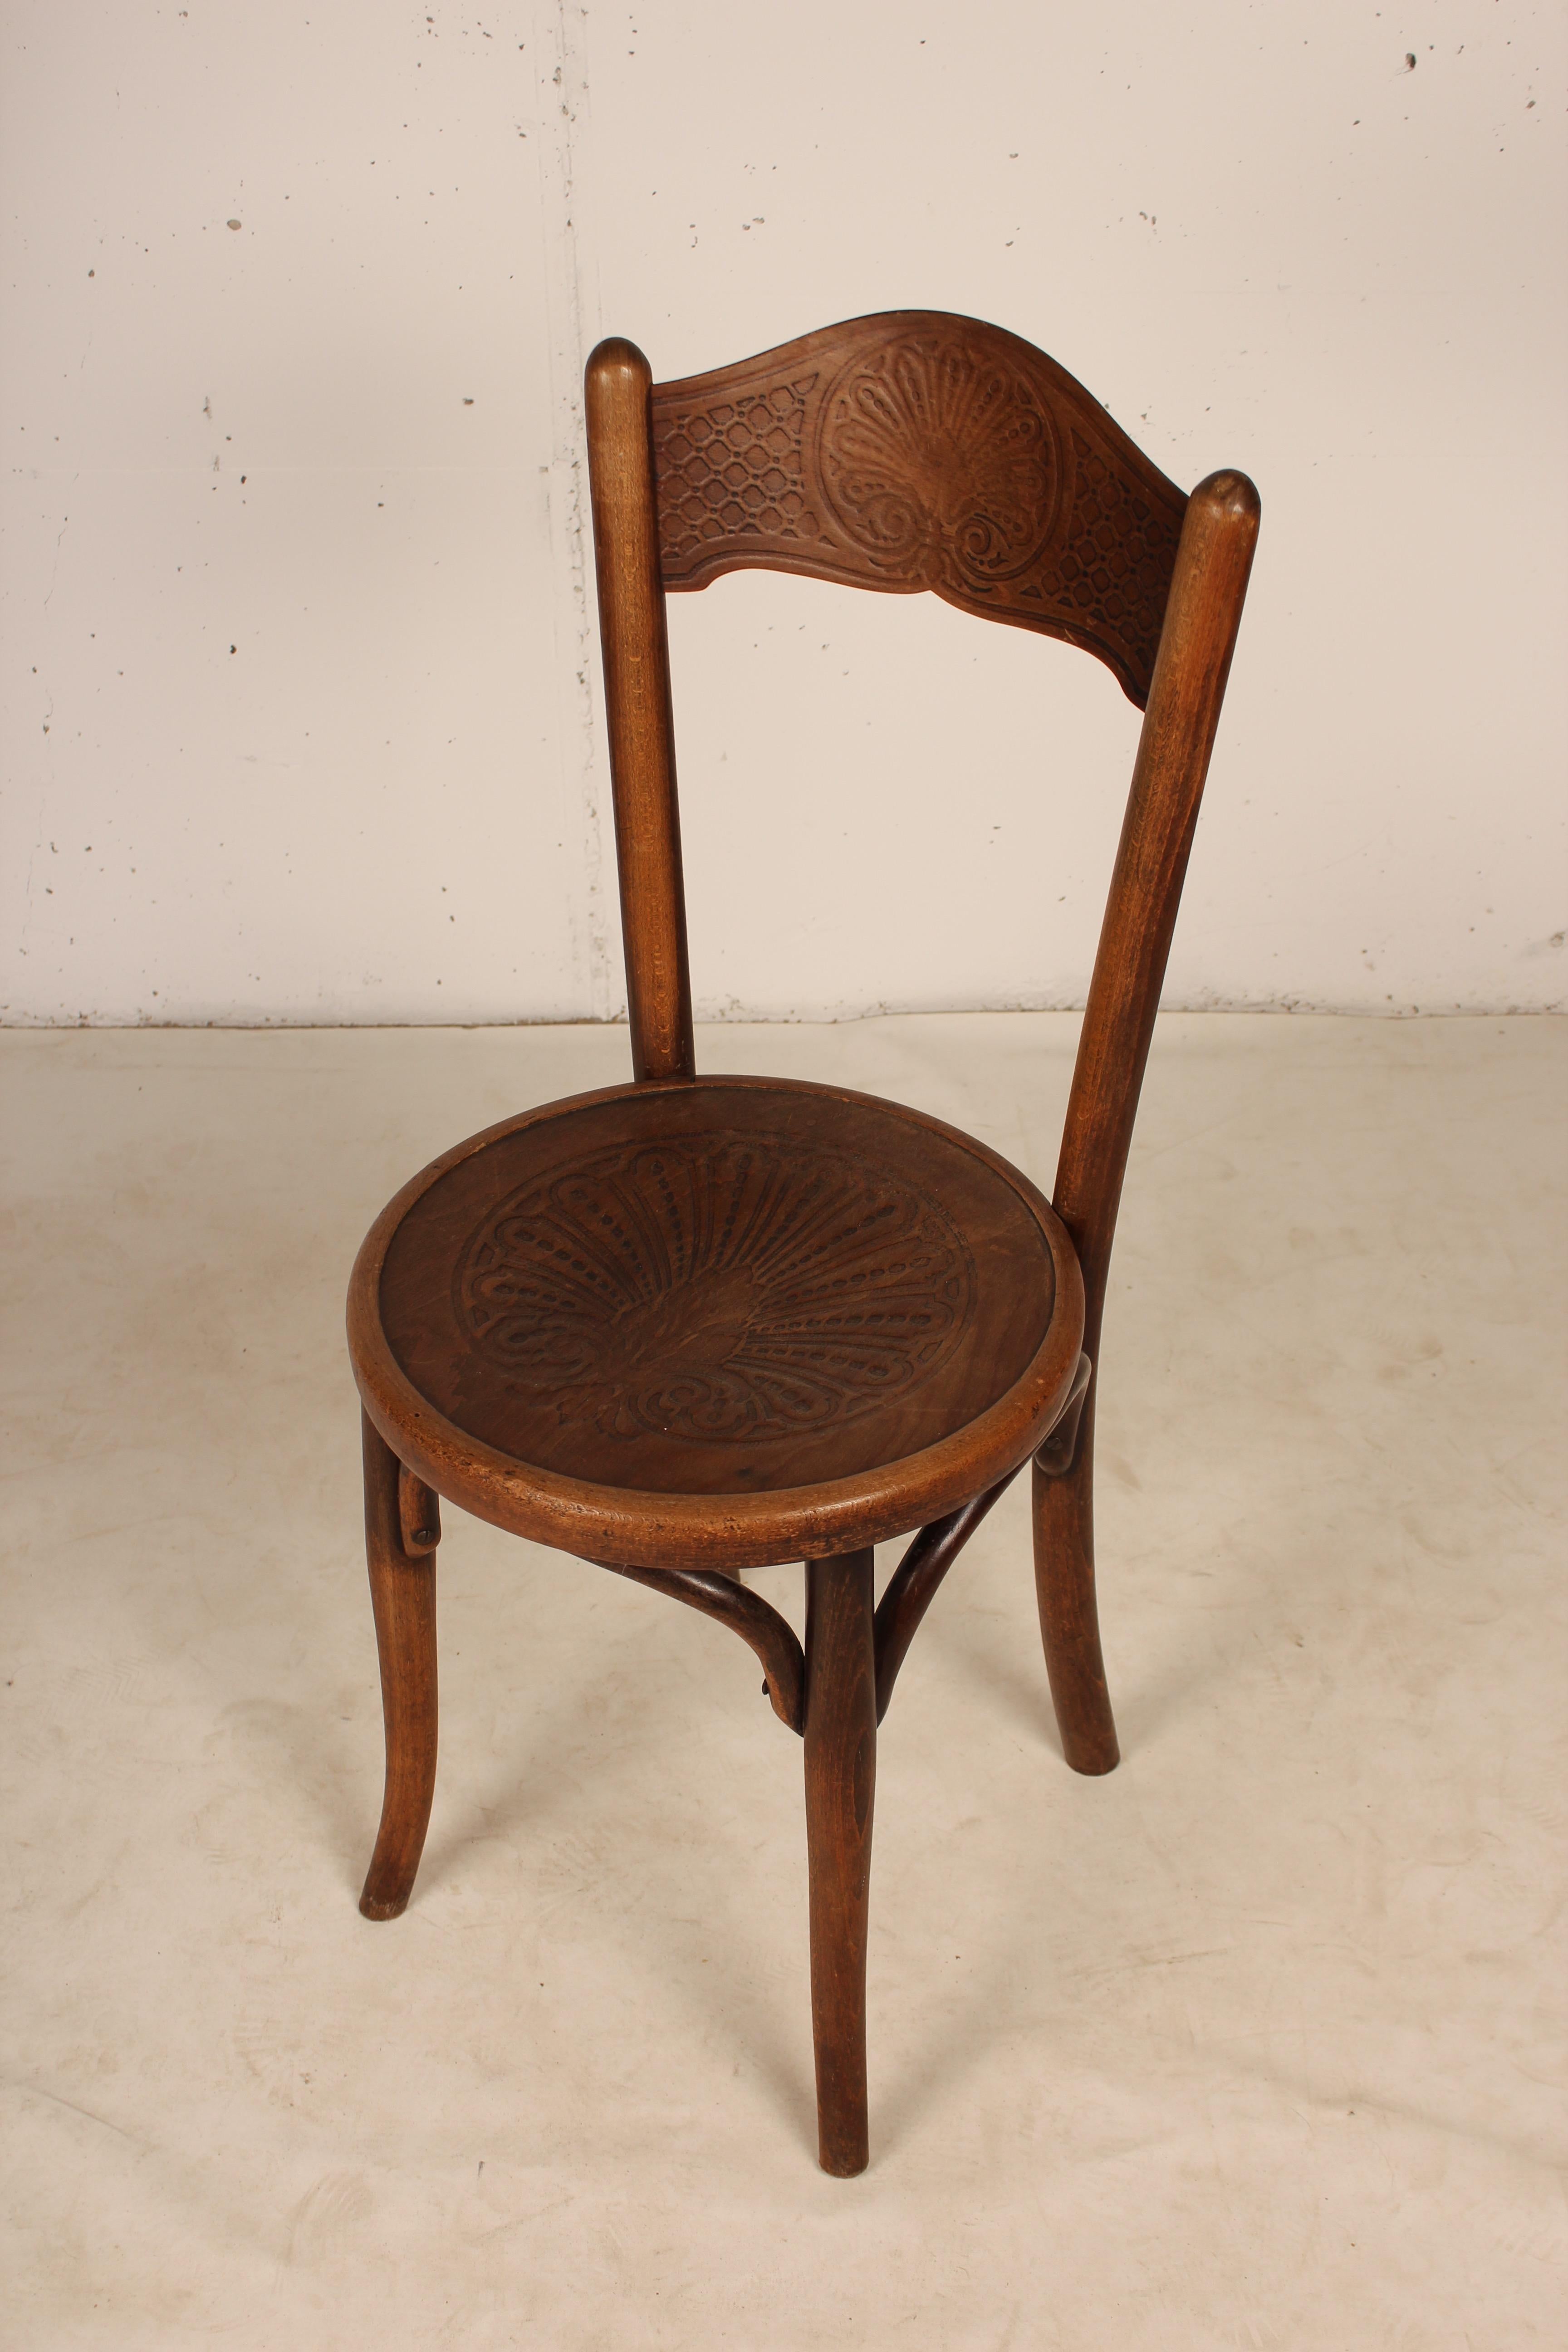 Set of 6 Bistro Chairs by Jacob & Josef Kohn, 1890 Austro-Hungarian Empire For Sale 4